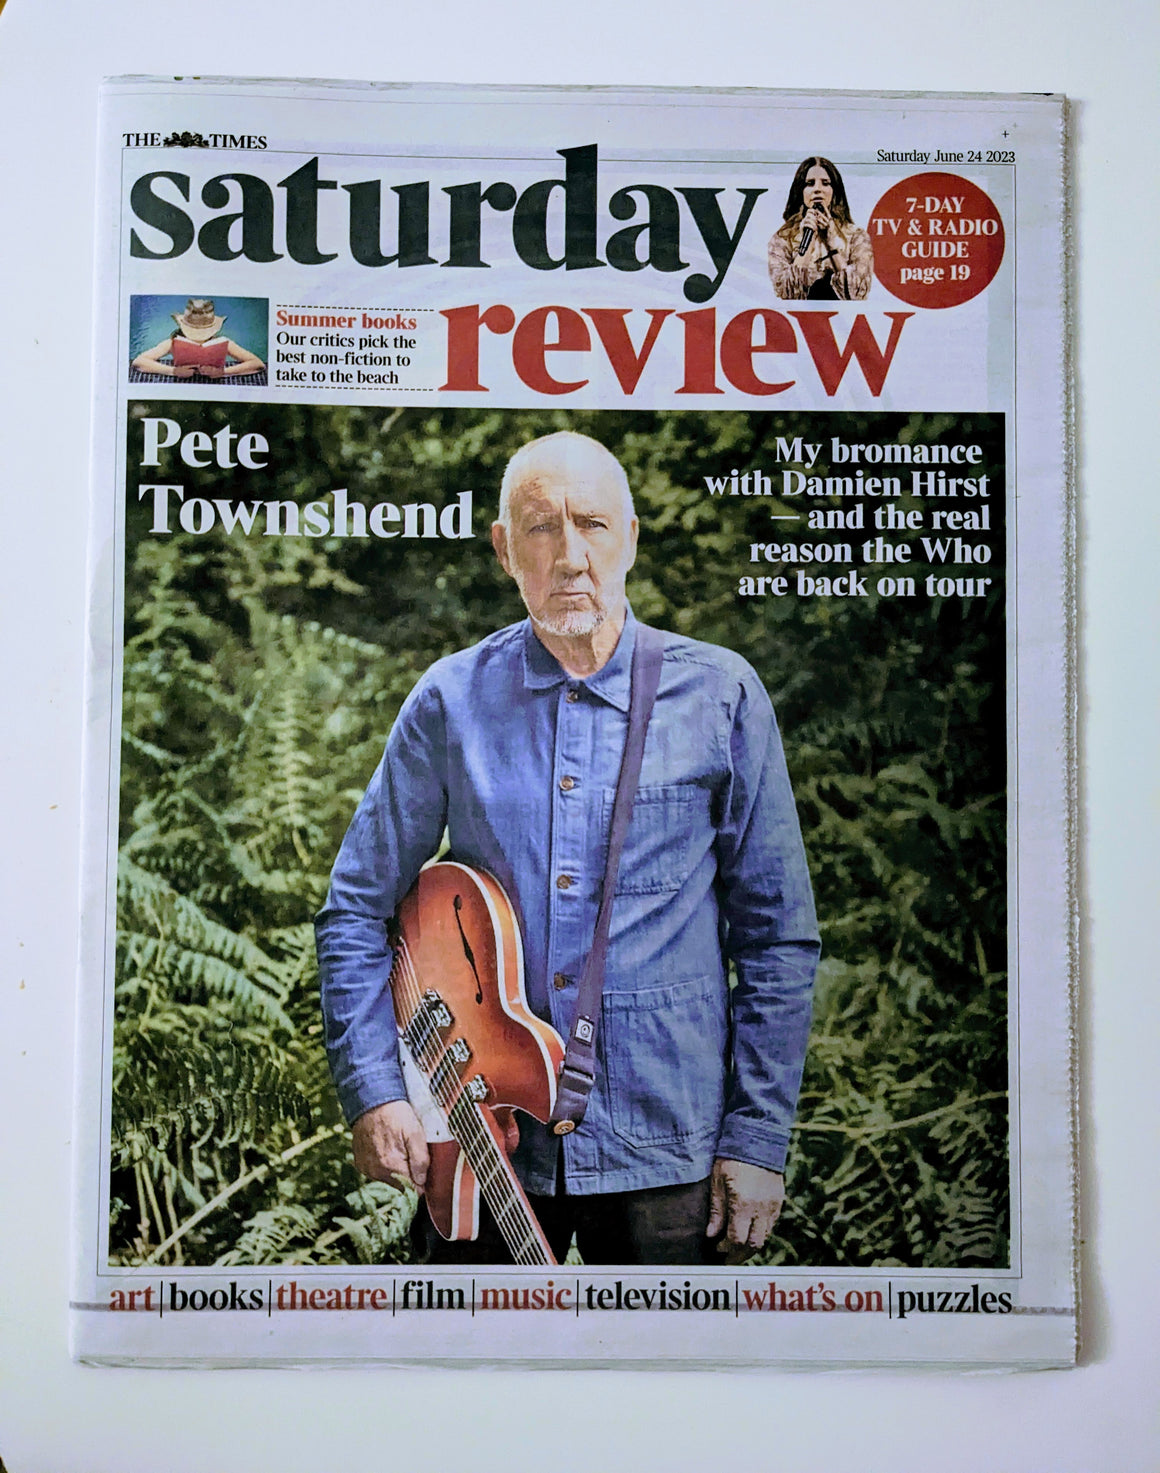 Times Saturday Review 24th June 2023 Pete Townshend interview The Who